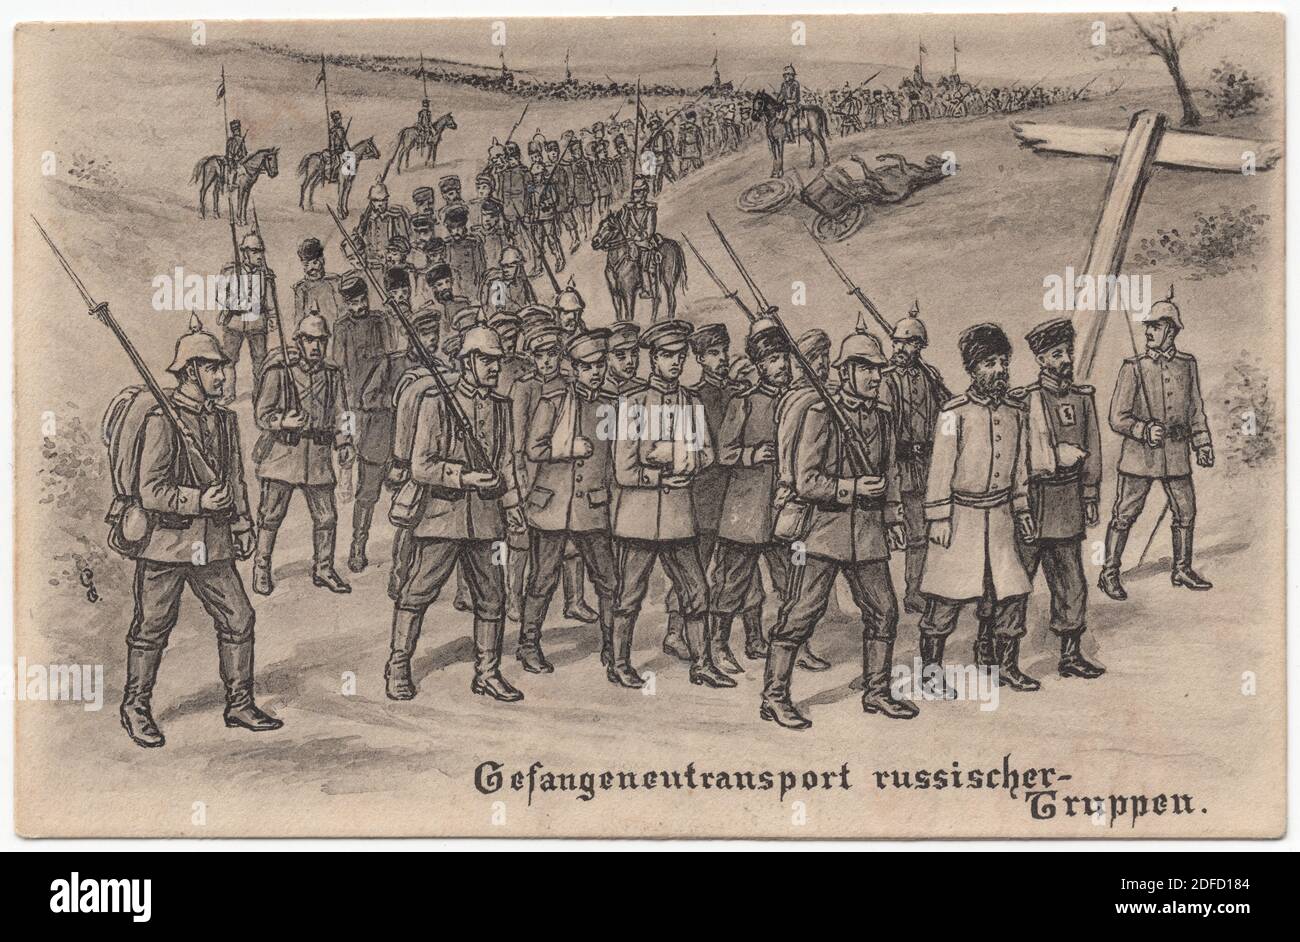 Russian prisoners of war march escorted by German escort soldiers during the First World War depicted in the drawing by an unknown artist dated probably from 1914 to 1917 and published in the German vintage postcard. Text in German means: Transport of Russian troops. Courtesy of the Azoor Postcard Collection. Stock Photo